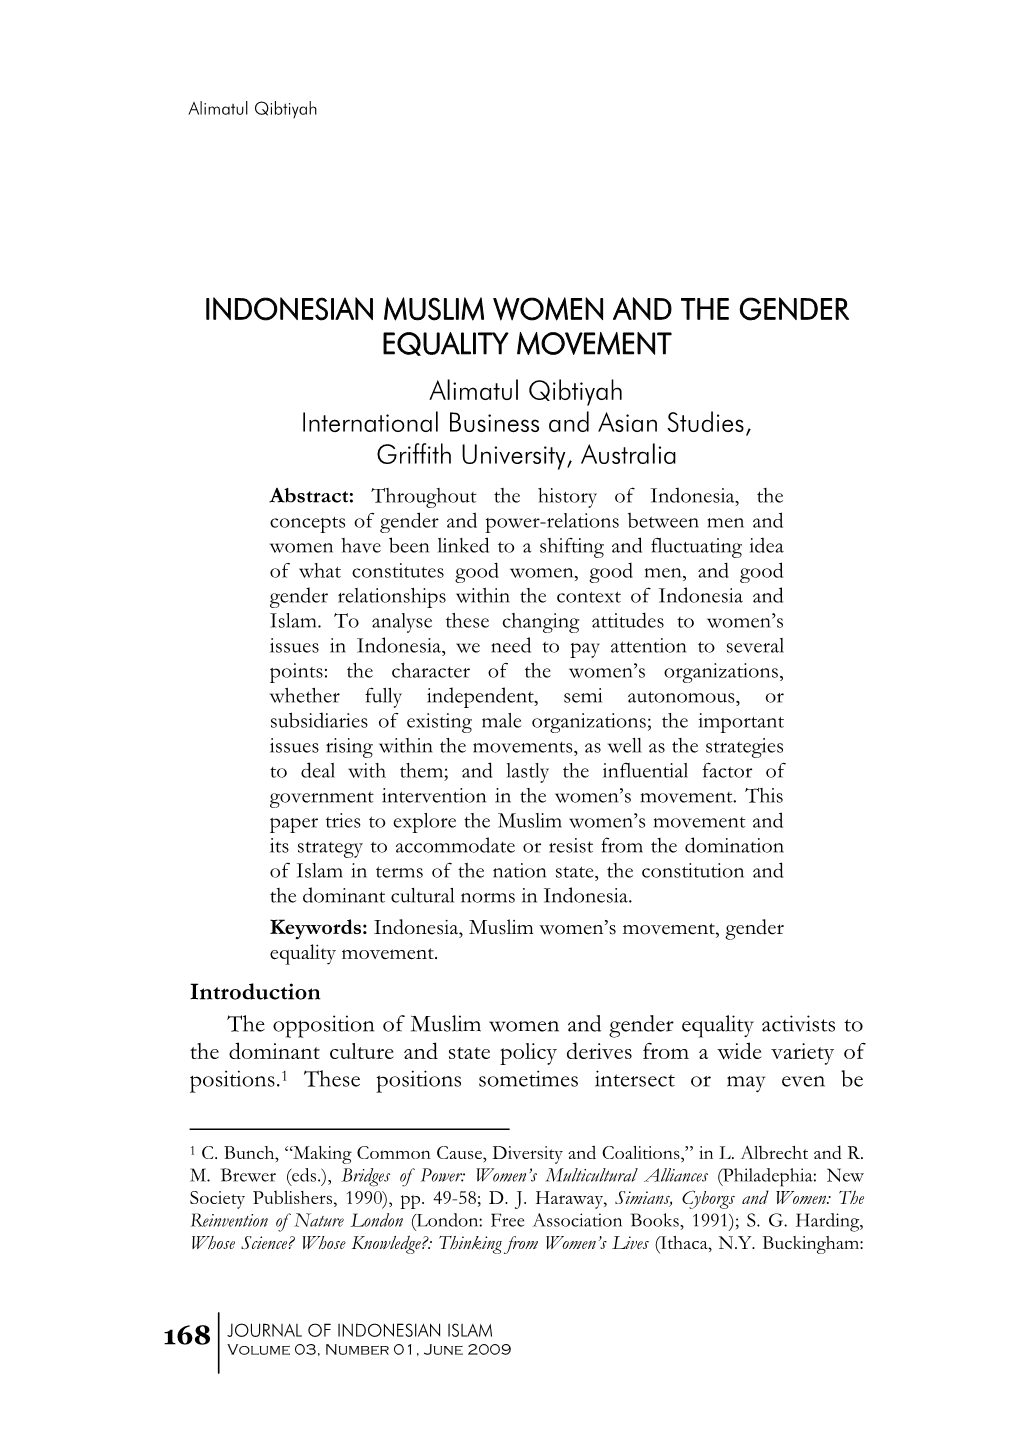 Indonesian Muslim Women and the Gender Equality Movement